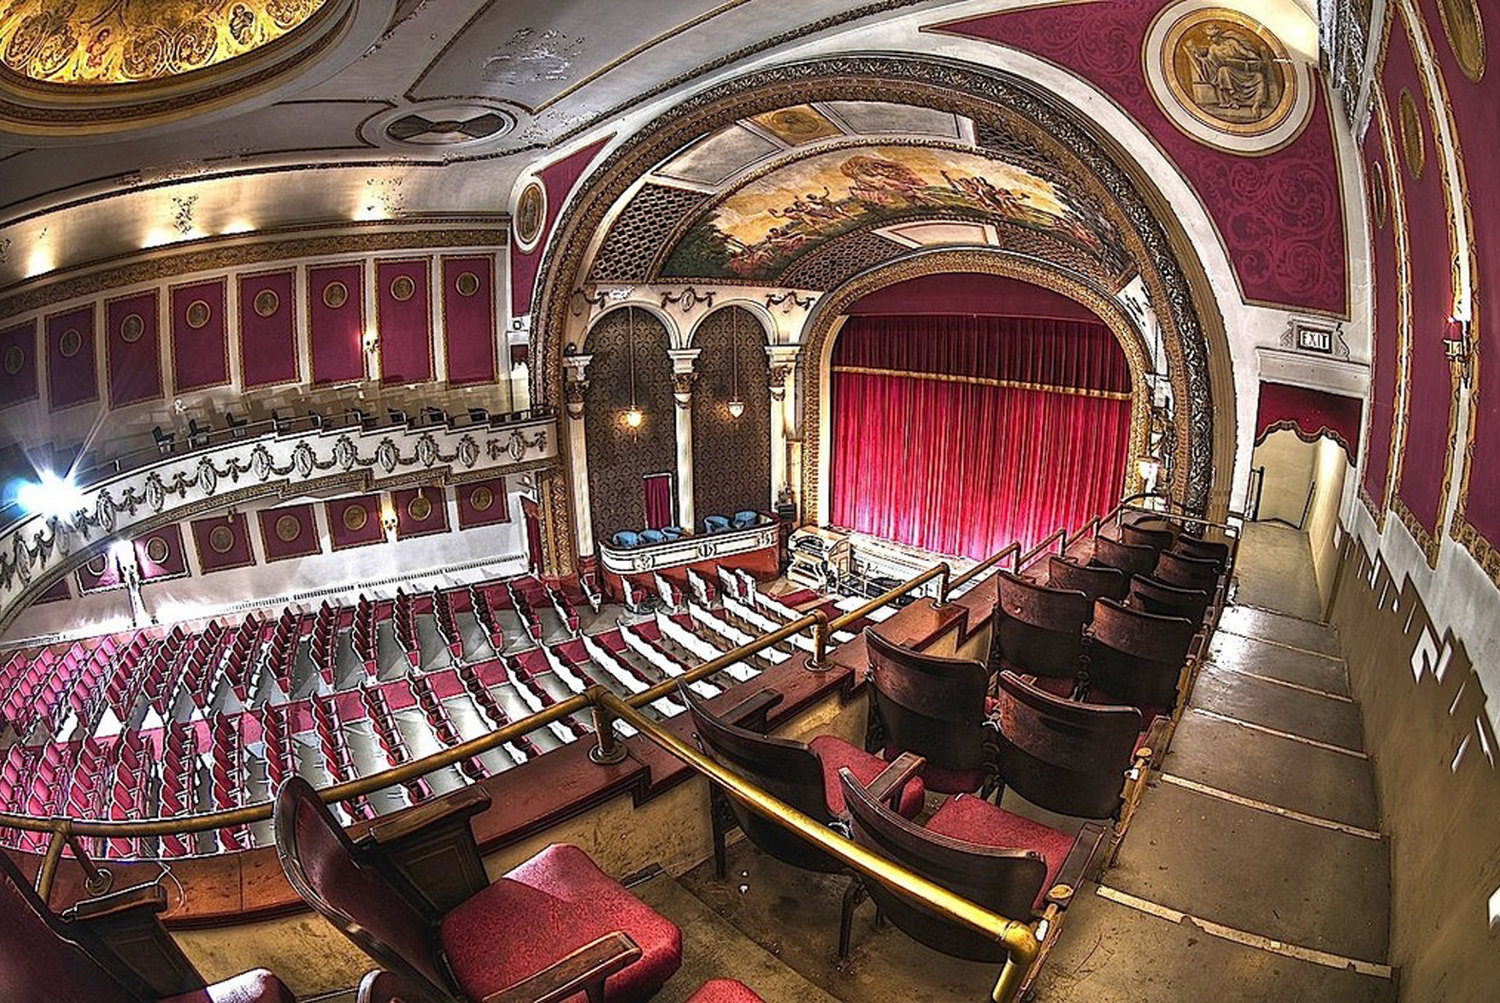 View from the mezzanine at the Columbus Theatre